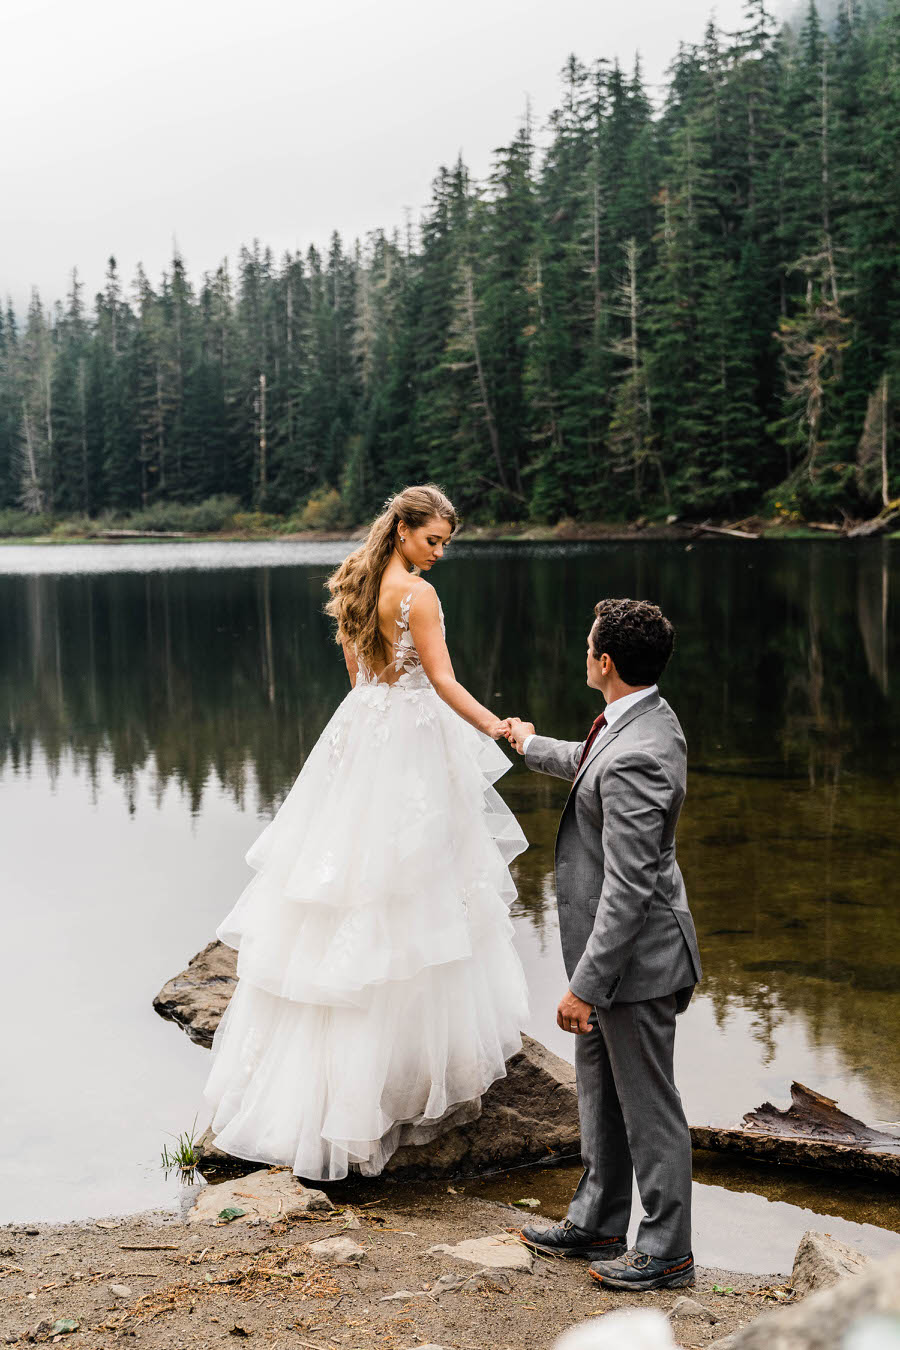 A bride stands on a rock and looks back at her groom next to an alpine lake